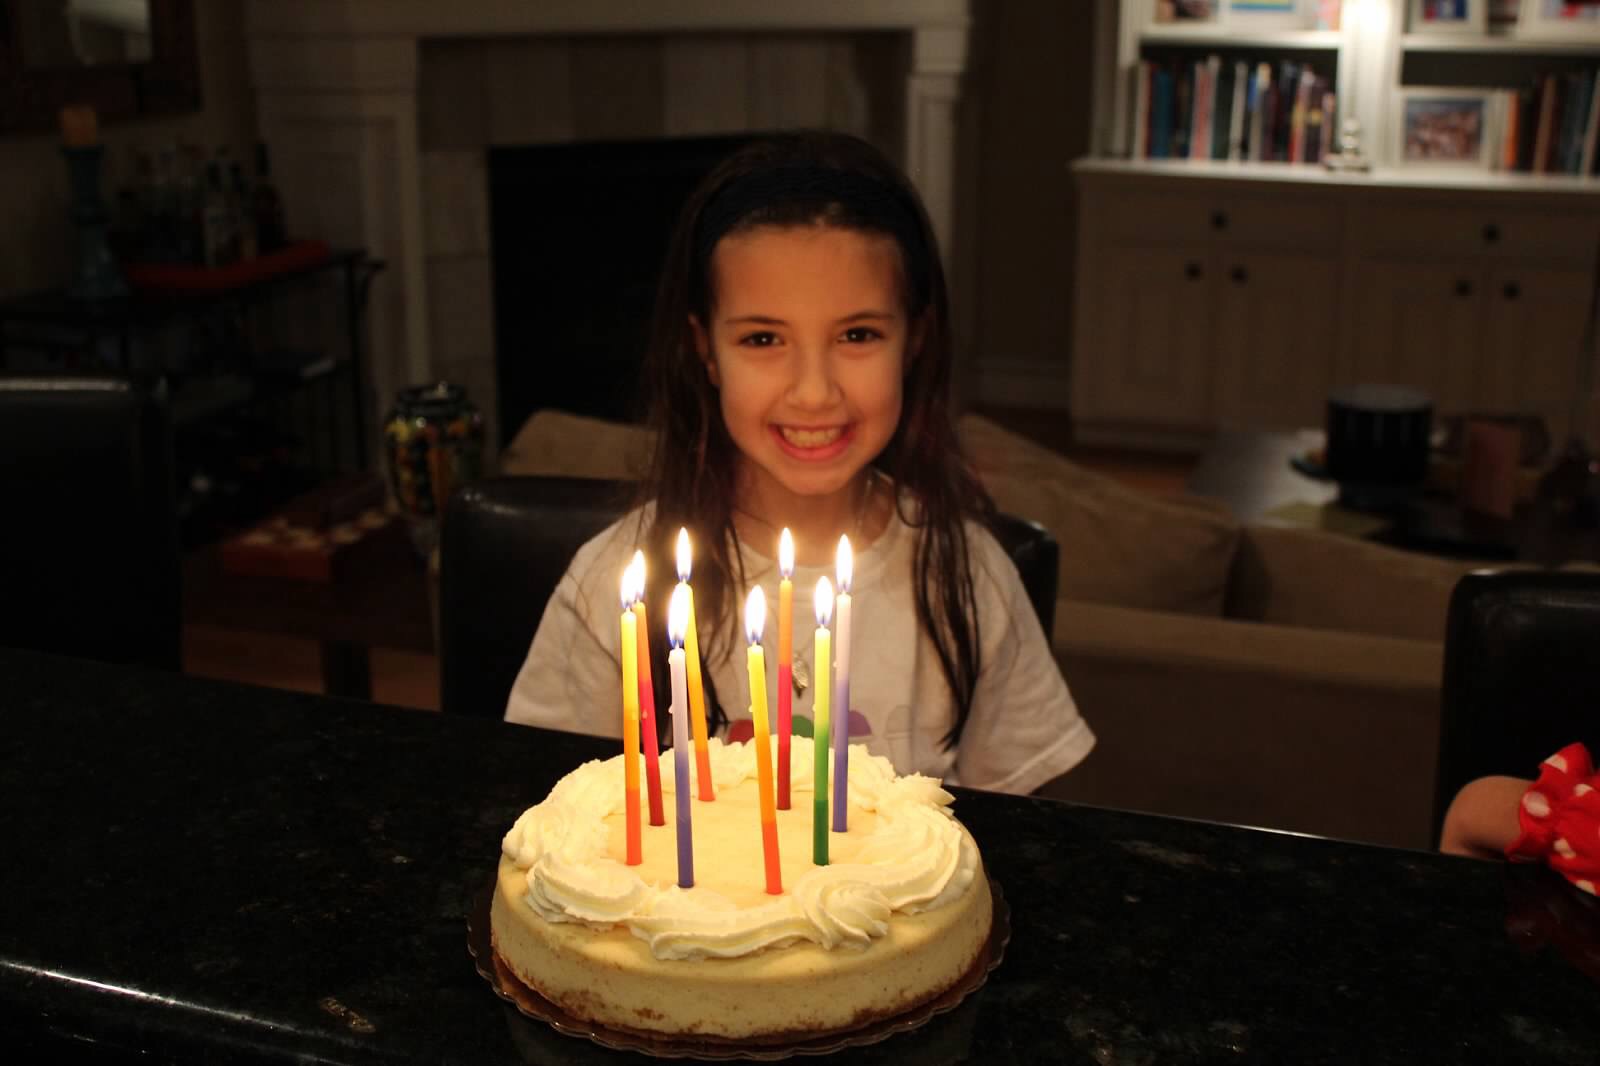 9-Year-Old Girl's Stanley Cup Birthday Gift Sparks Viral Debate